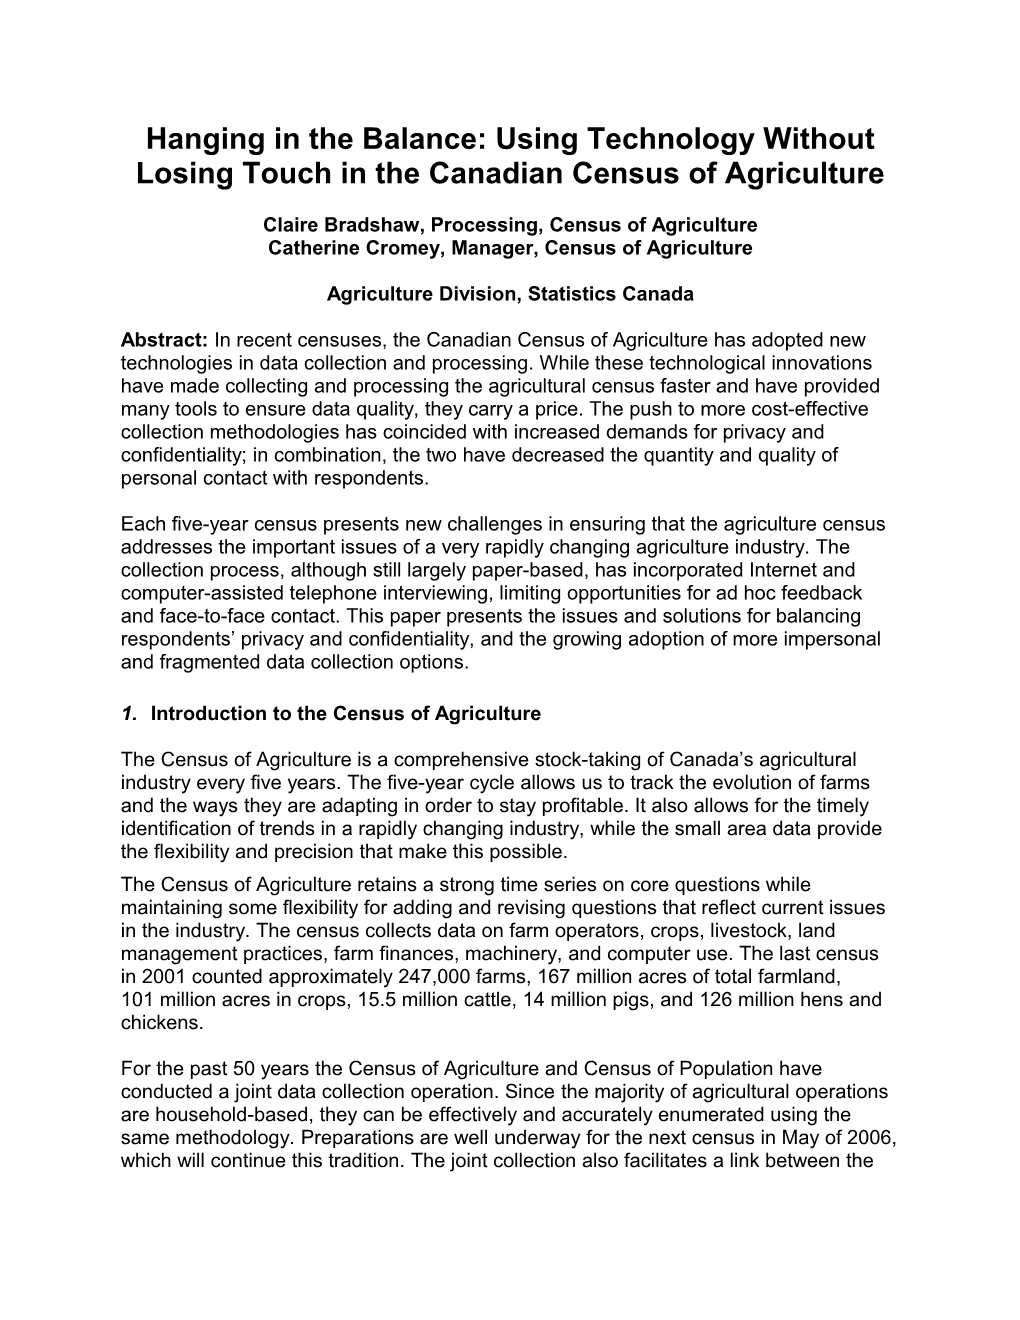 Hanging in the Balance : Using Technology Without Losing Touch in the Canadian Census Of